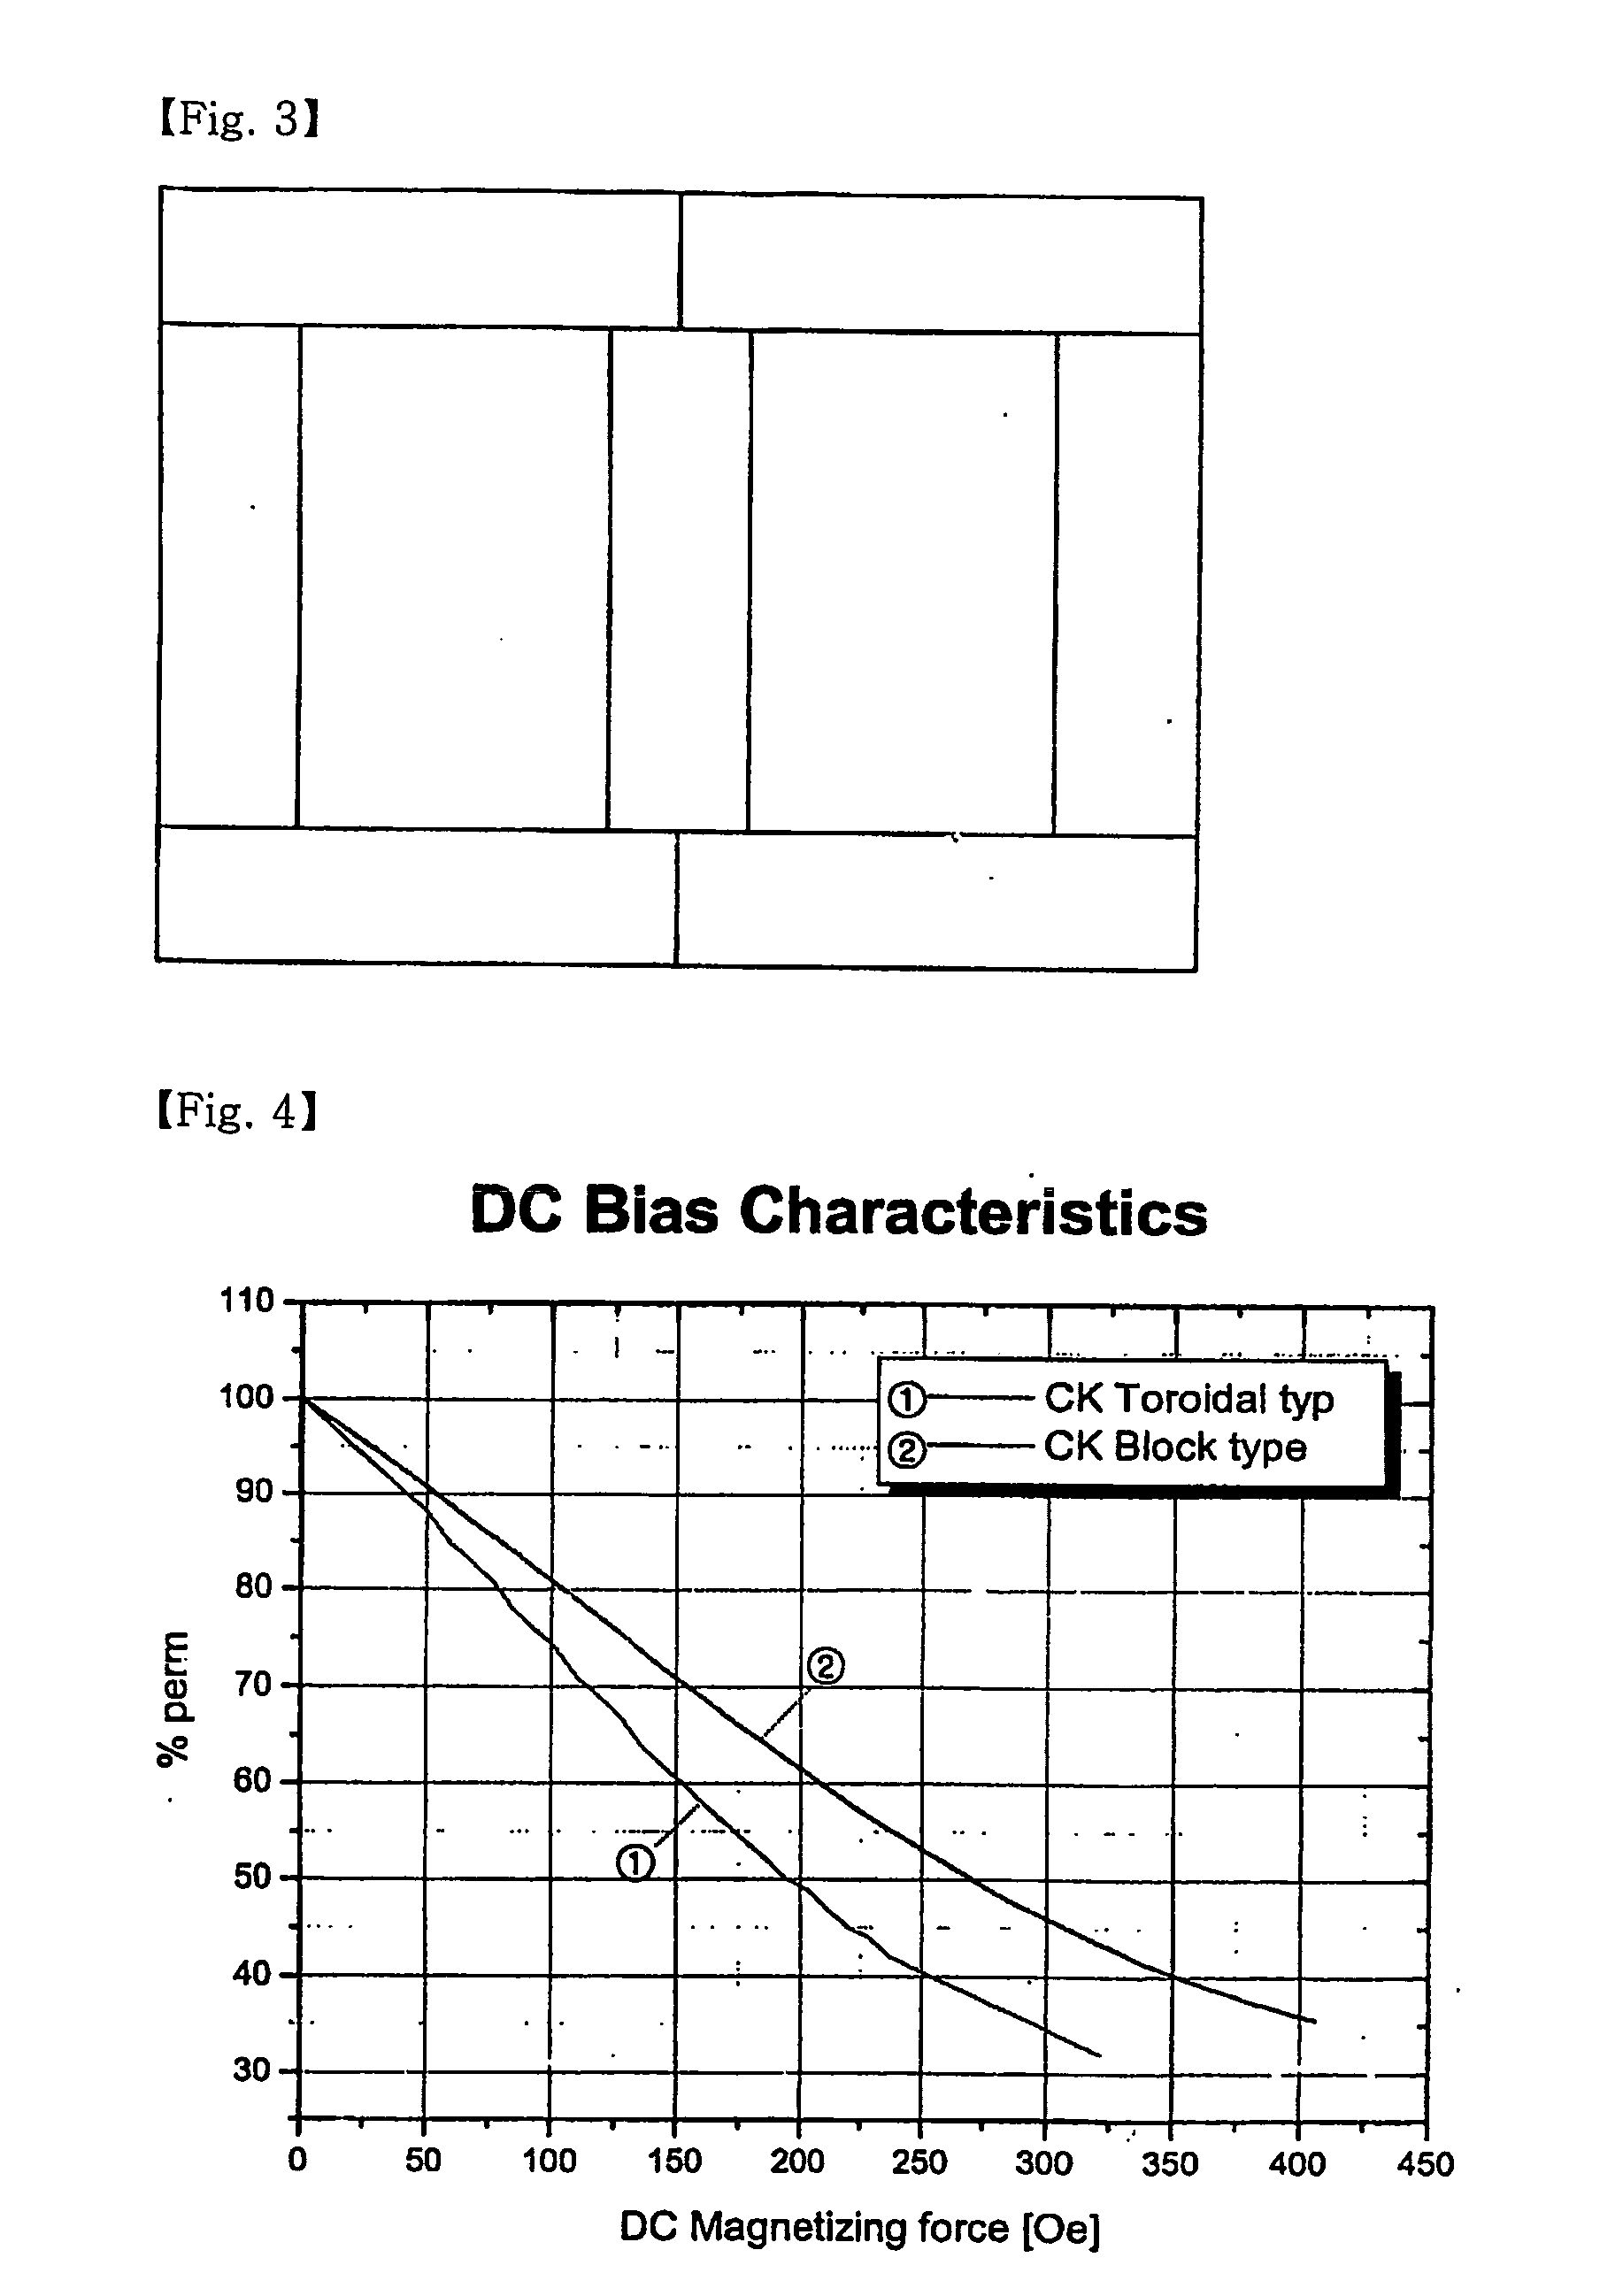 Unit Block Used in Manufacturing Core with Soft Magnetic Metal Powder, and Method for Manufacturing Core with High Current Dc Bias Characteristics Using the Unit Block